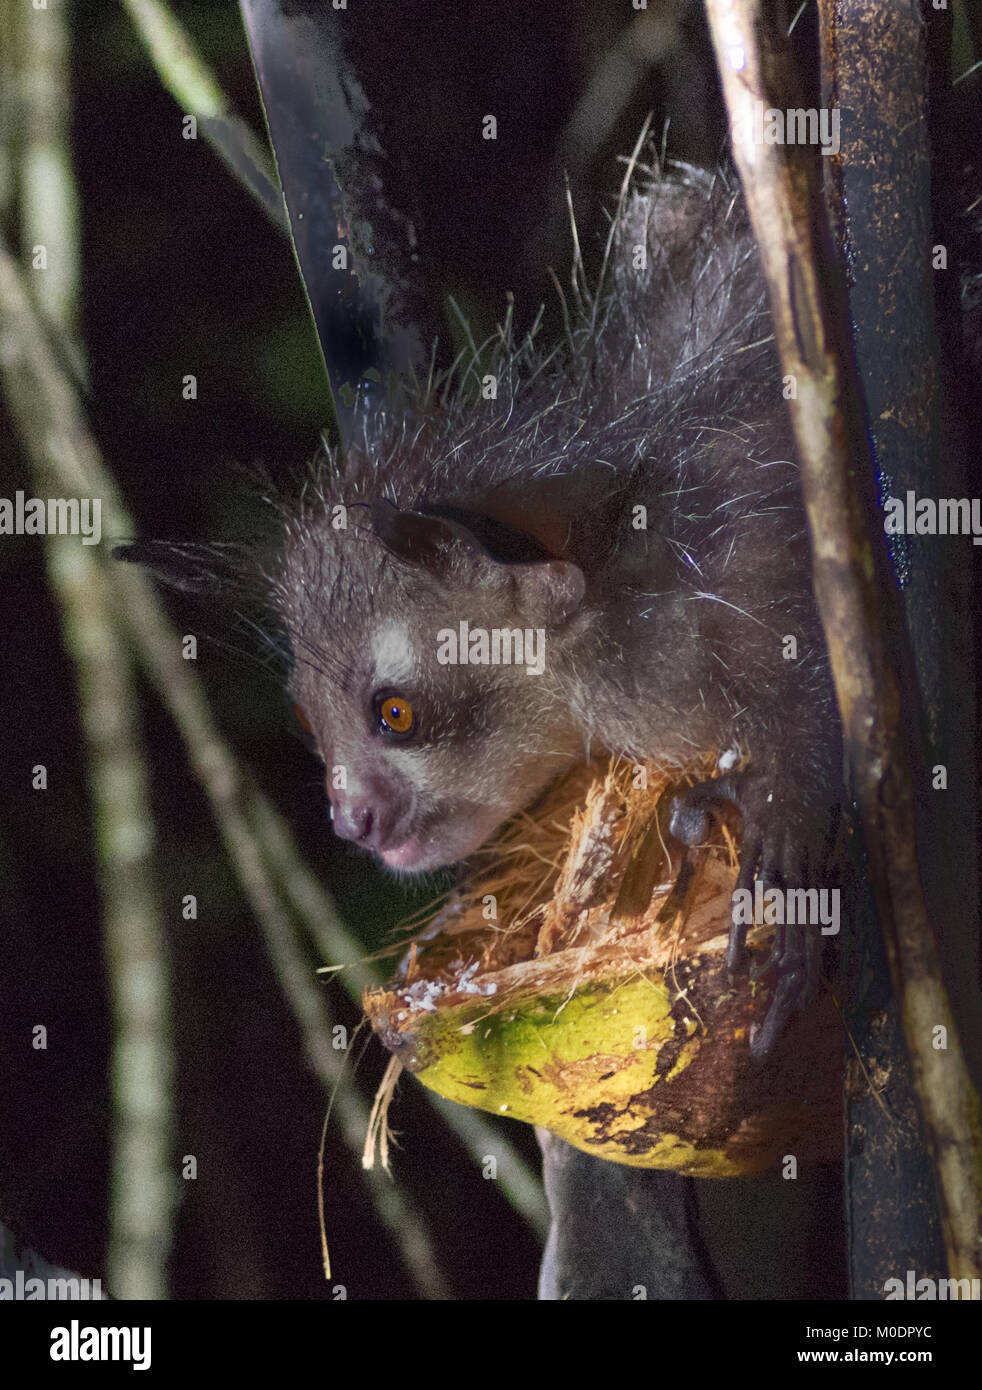 An Aye Aye feeding on a coconut in the Madagascan rainforest Stock Photo